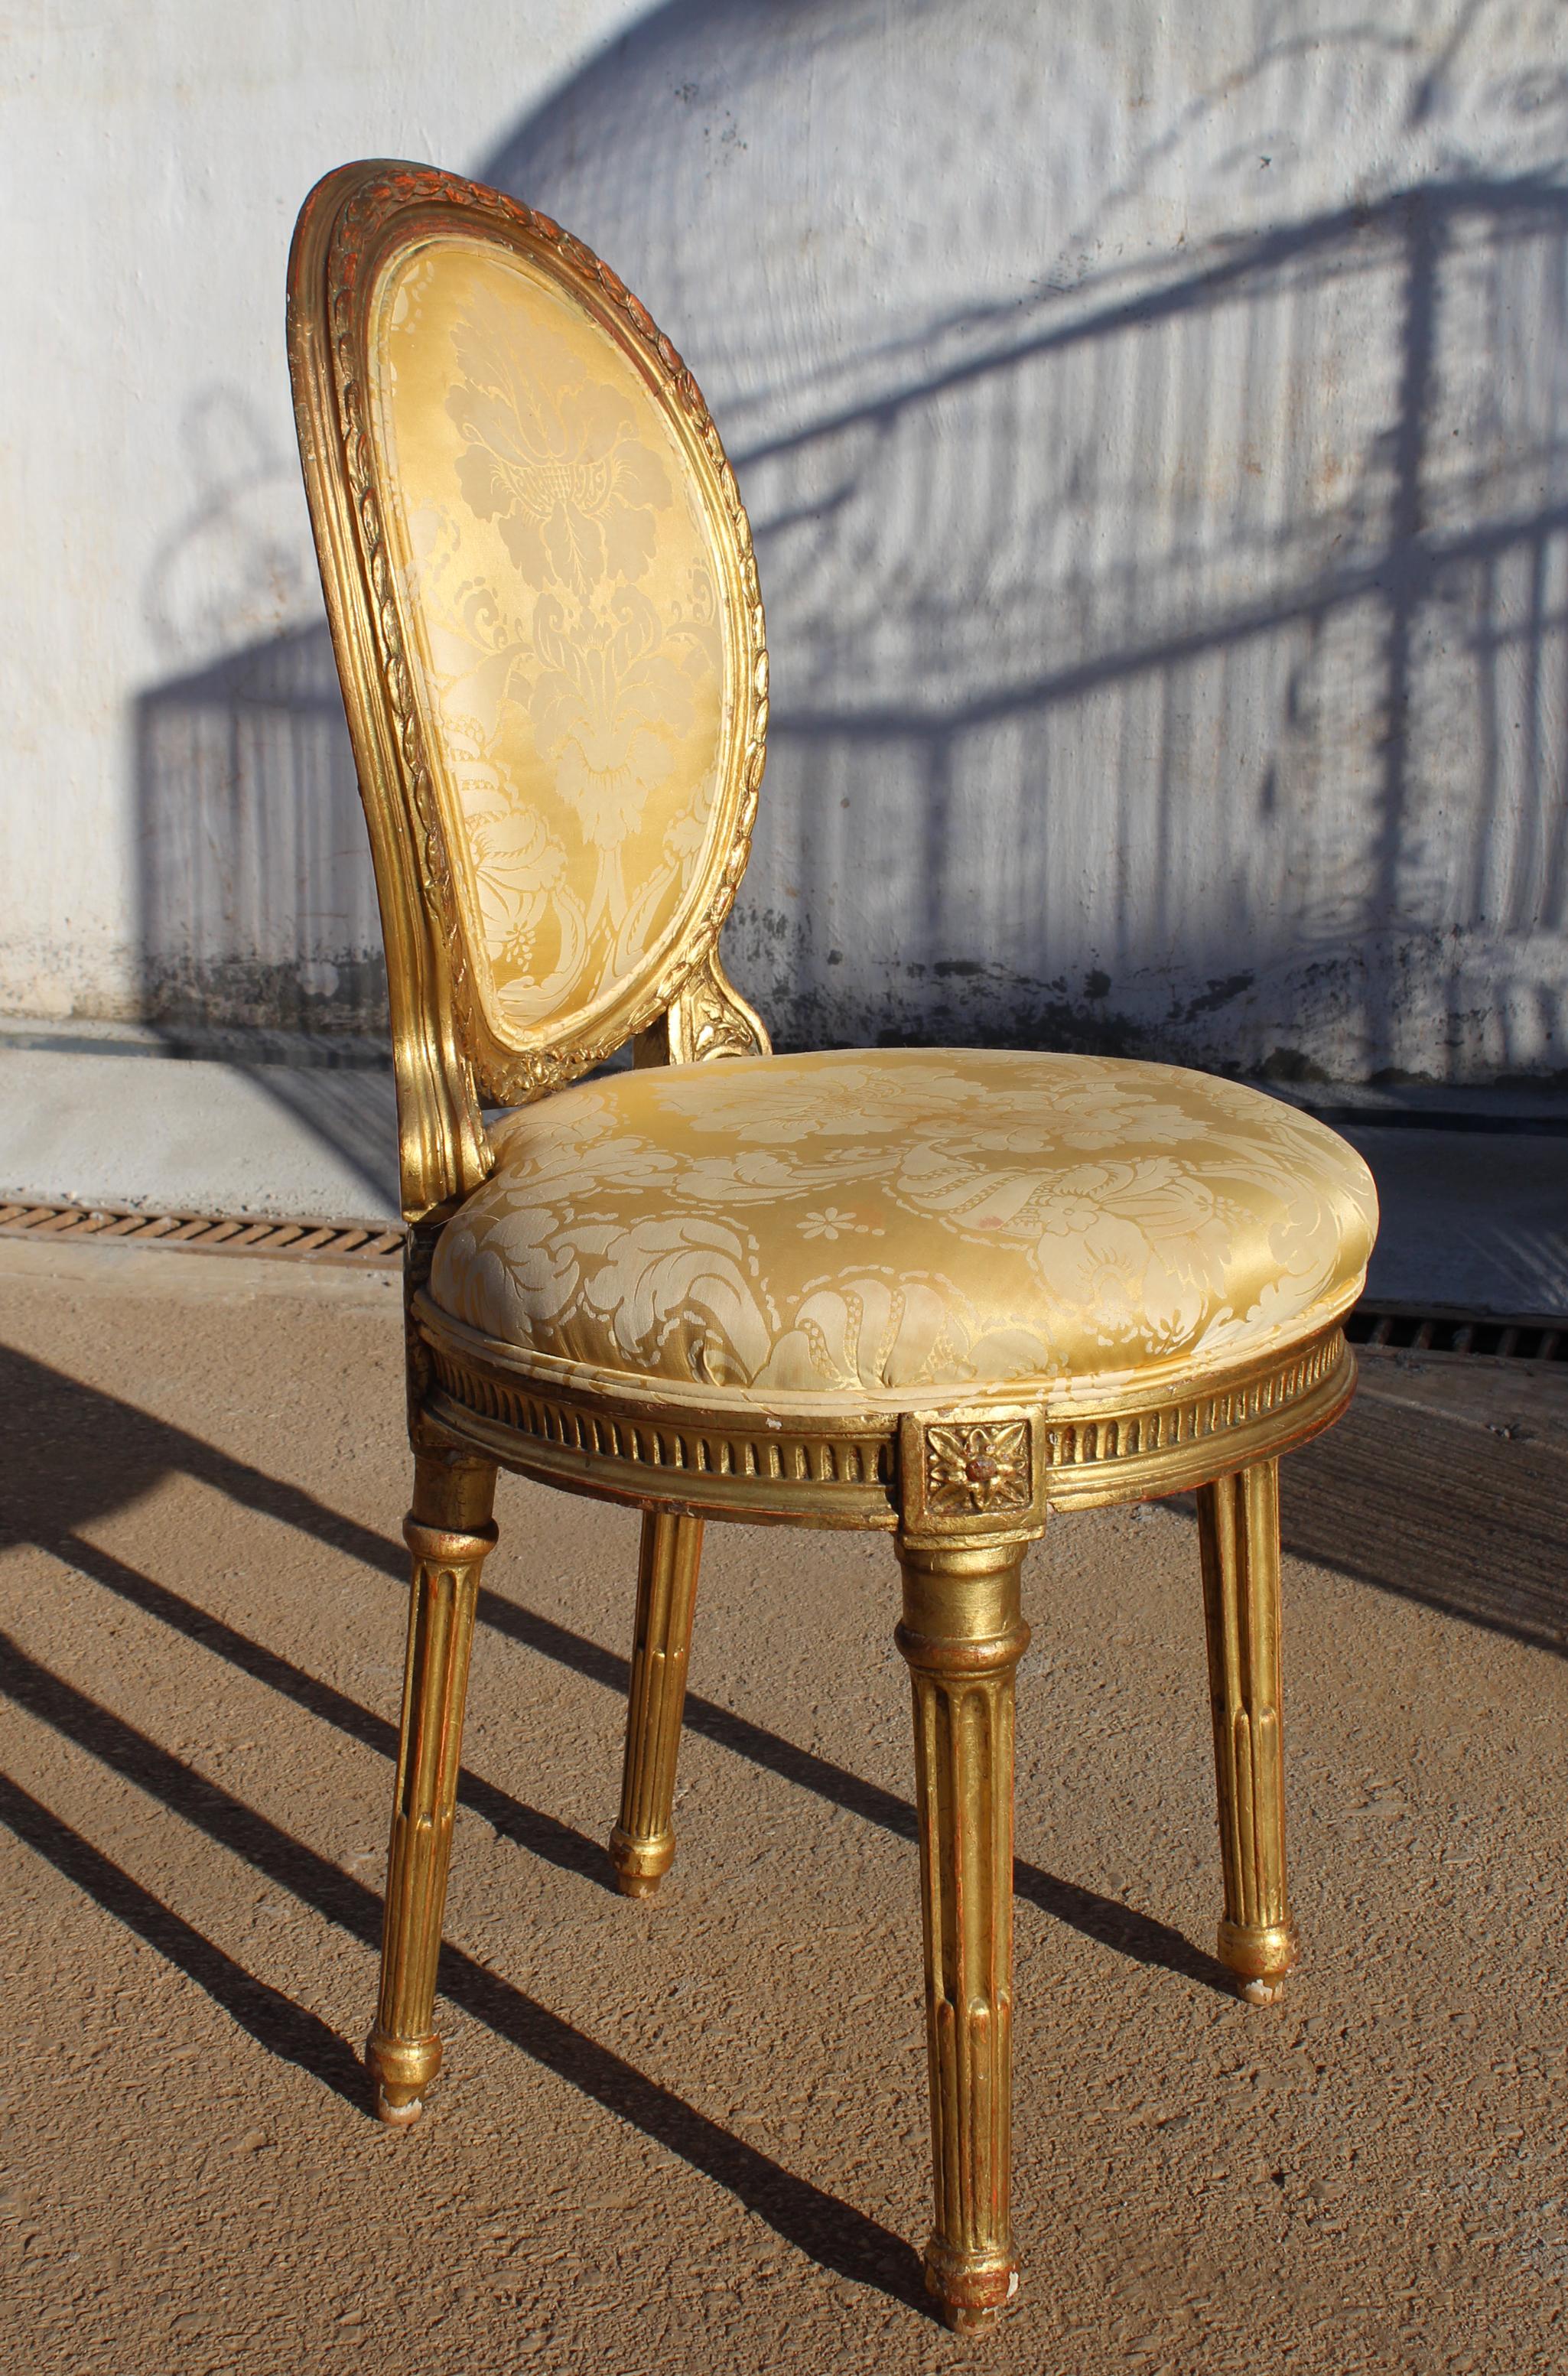 19th century French neoclassical upholstered chair, with the rare quality of being slightly smaller than similar period chairs, making it rare and unique.